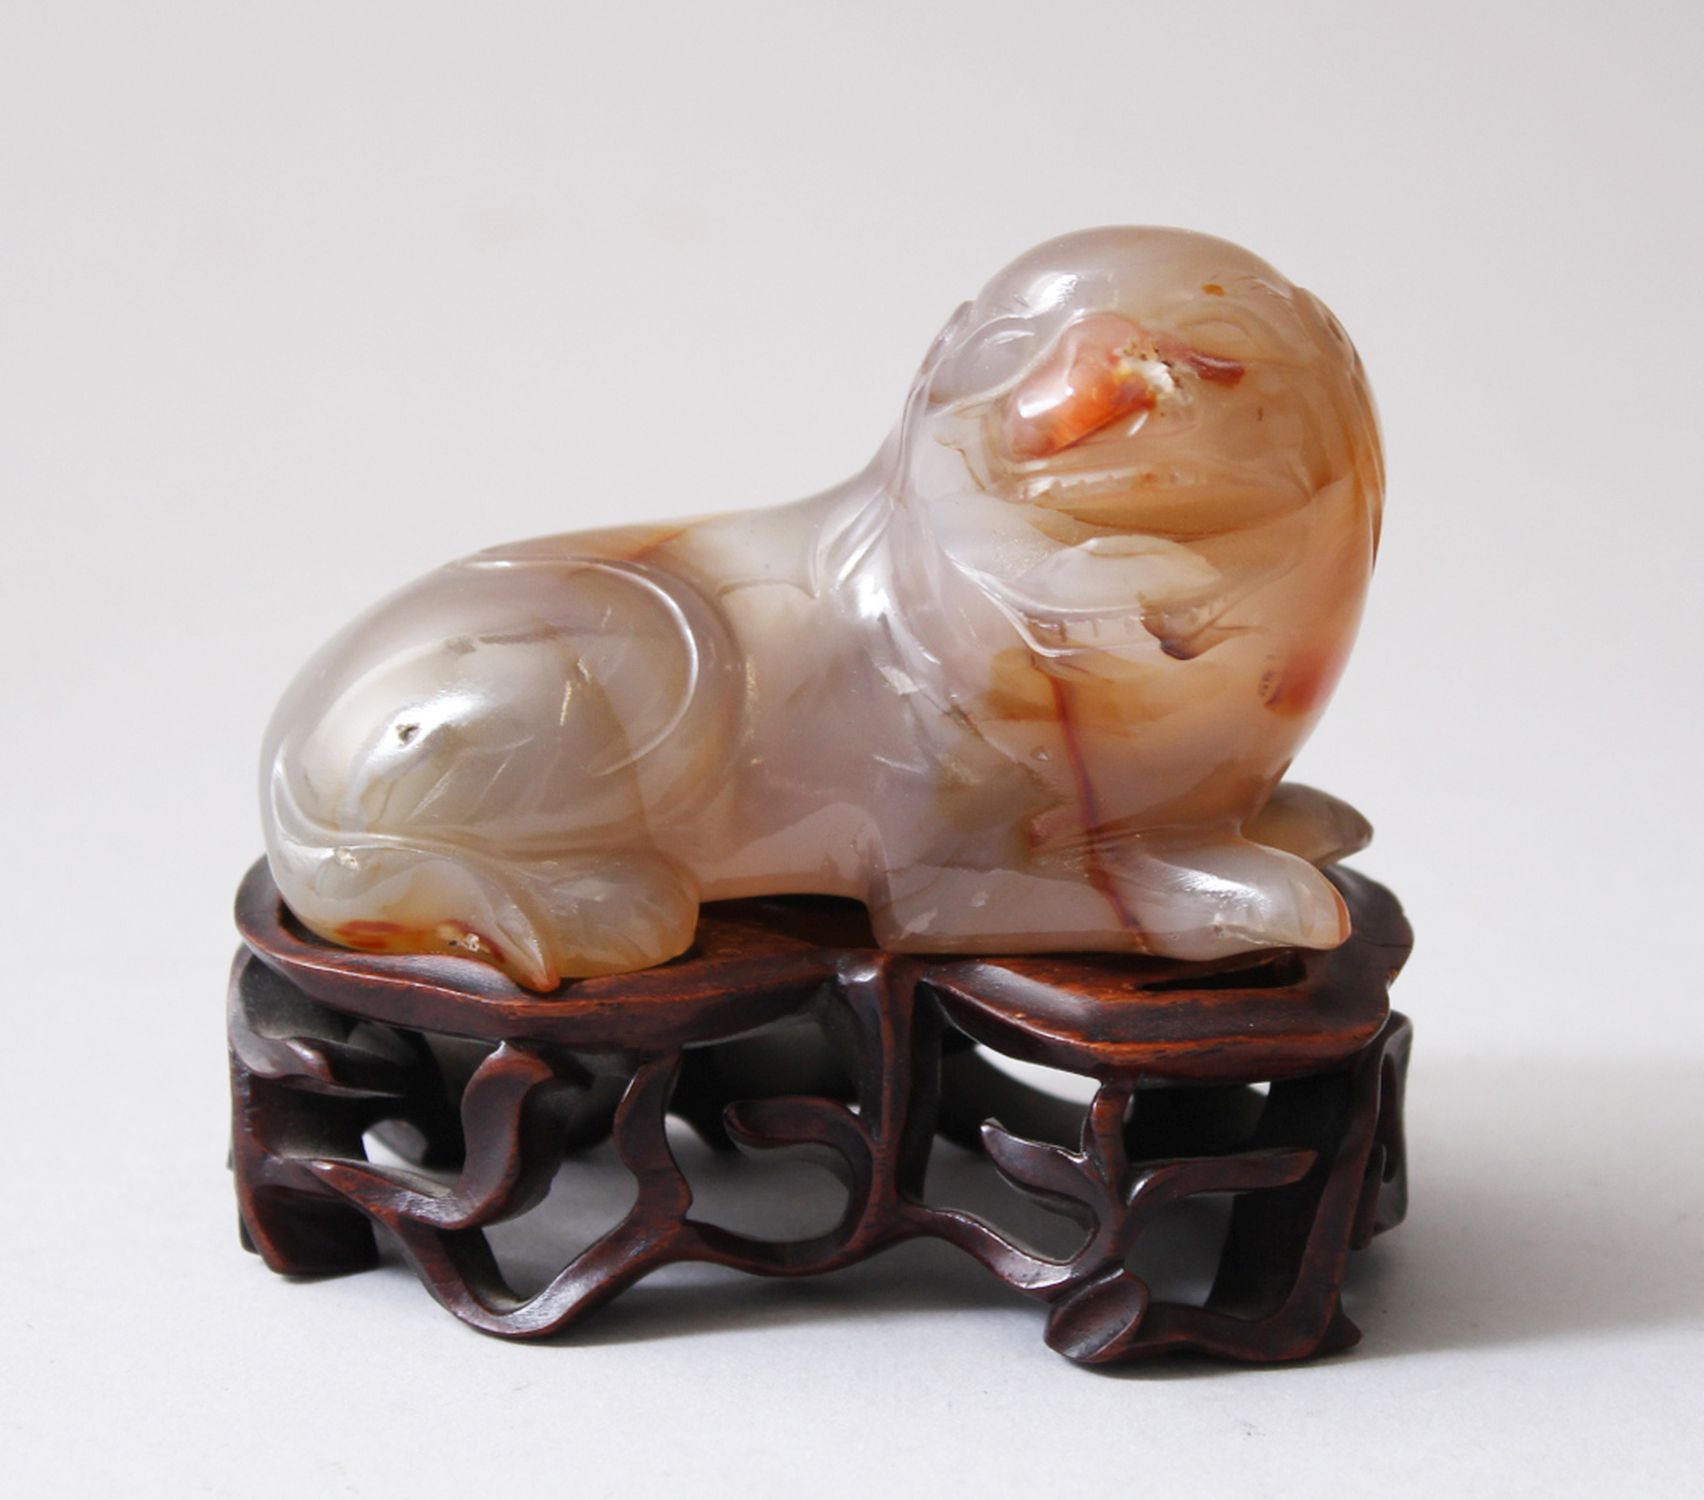 A 19TH CENTURY CHINESE AGATE CARVED FIGURE OF A DOG & HARDWOOD STAND, the agate dog measures 5cm